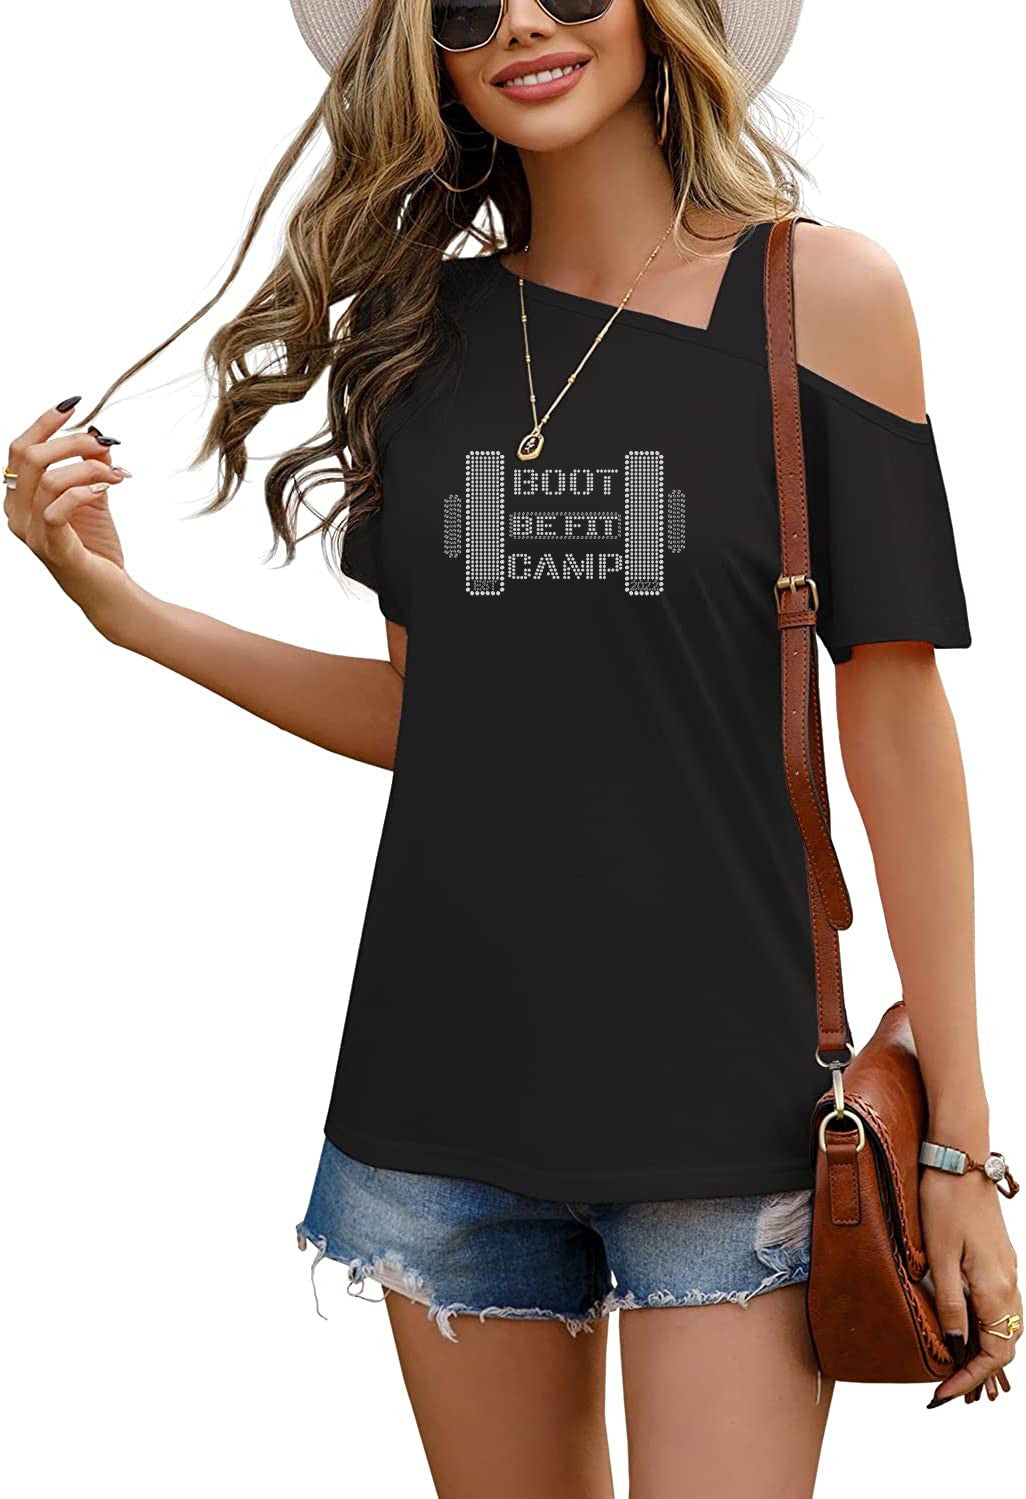 BE FIT BOOTCAMP | BLING BUSINESS CASUAL Women's Cold Shoulder Short Sleeve Top